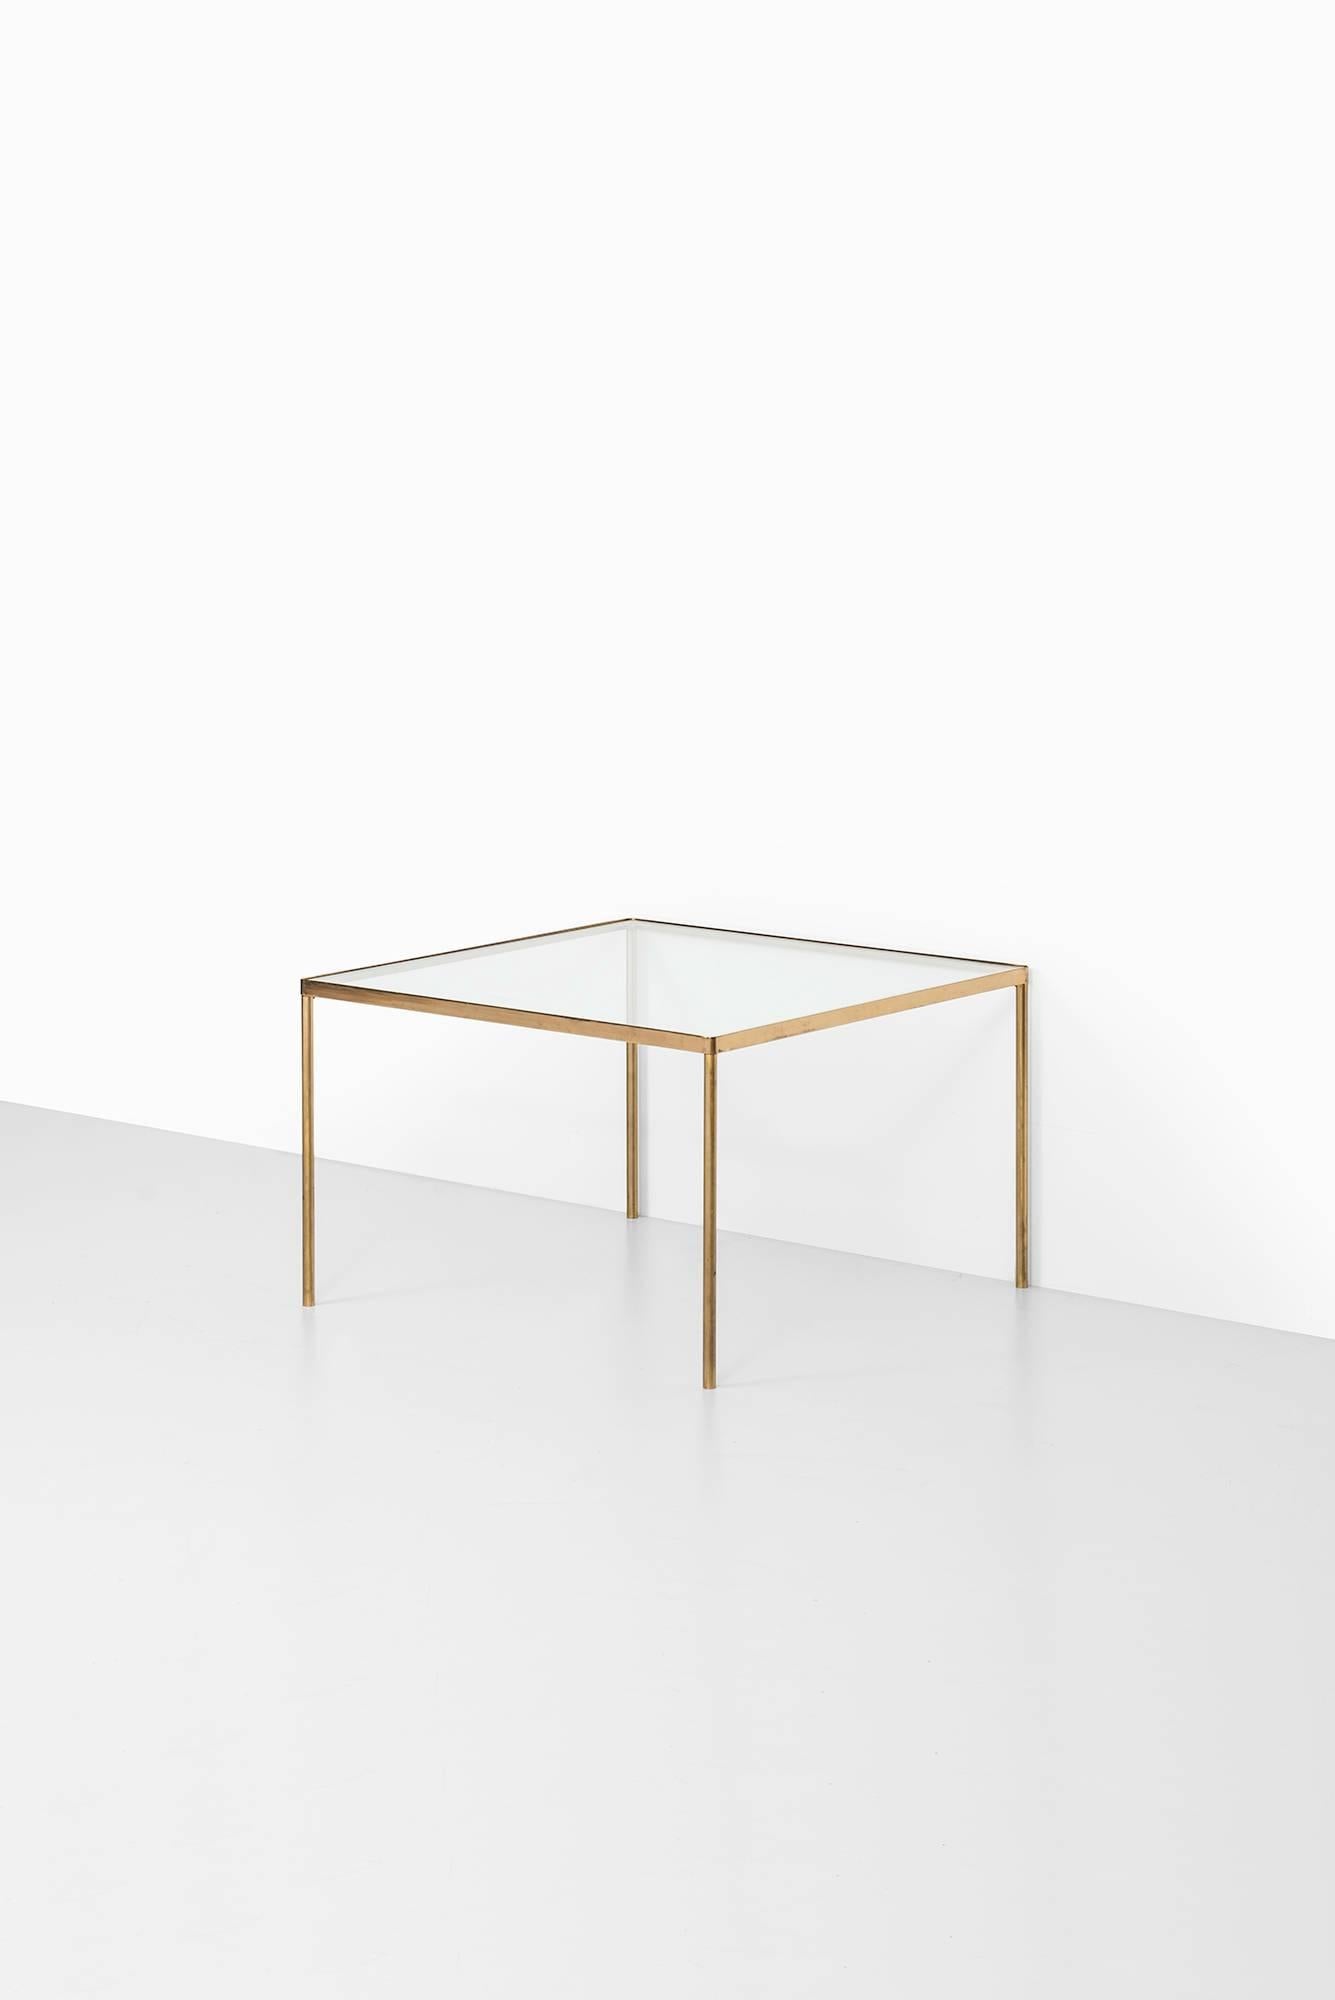 Italian Mid-Century Coffee Table in Brass and Glass